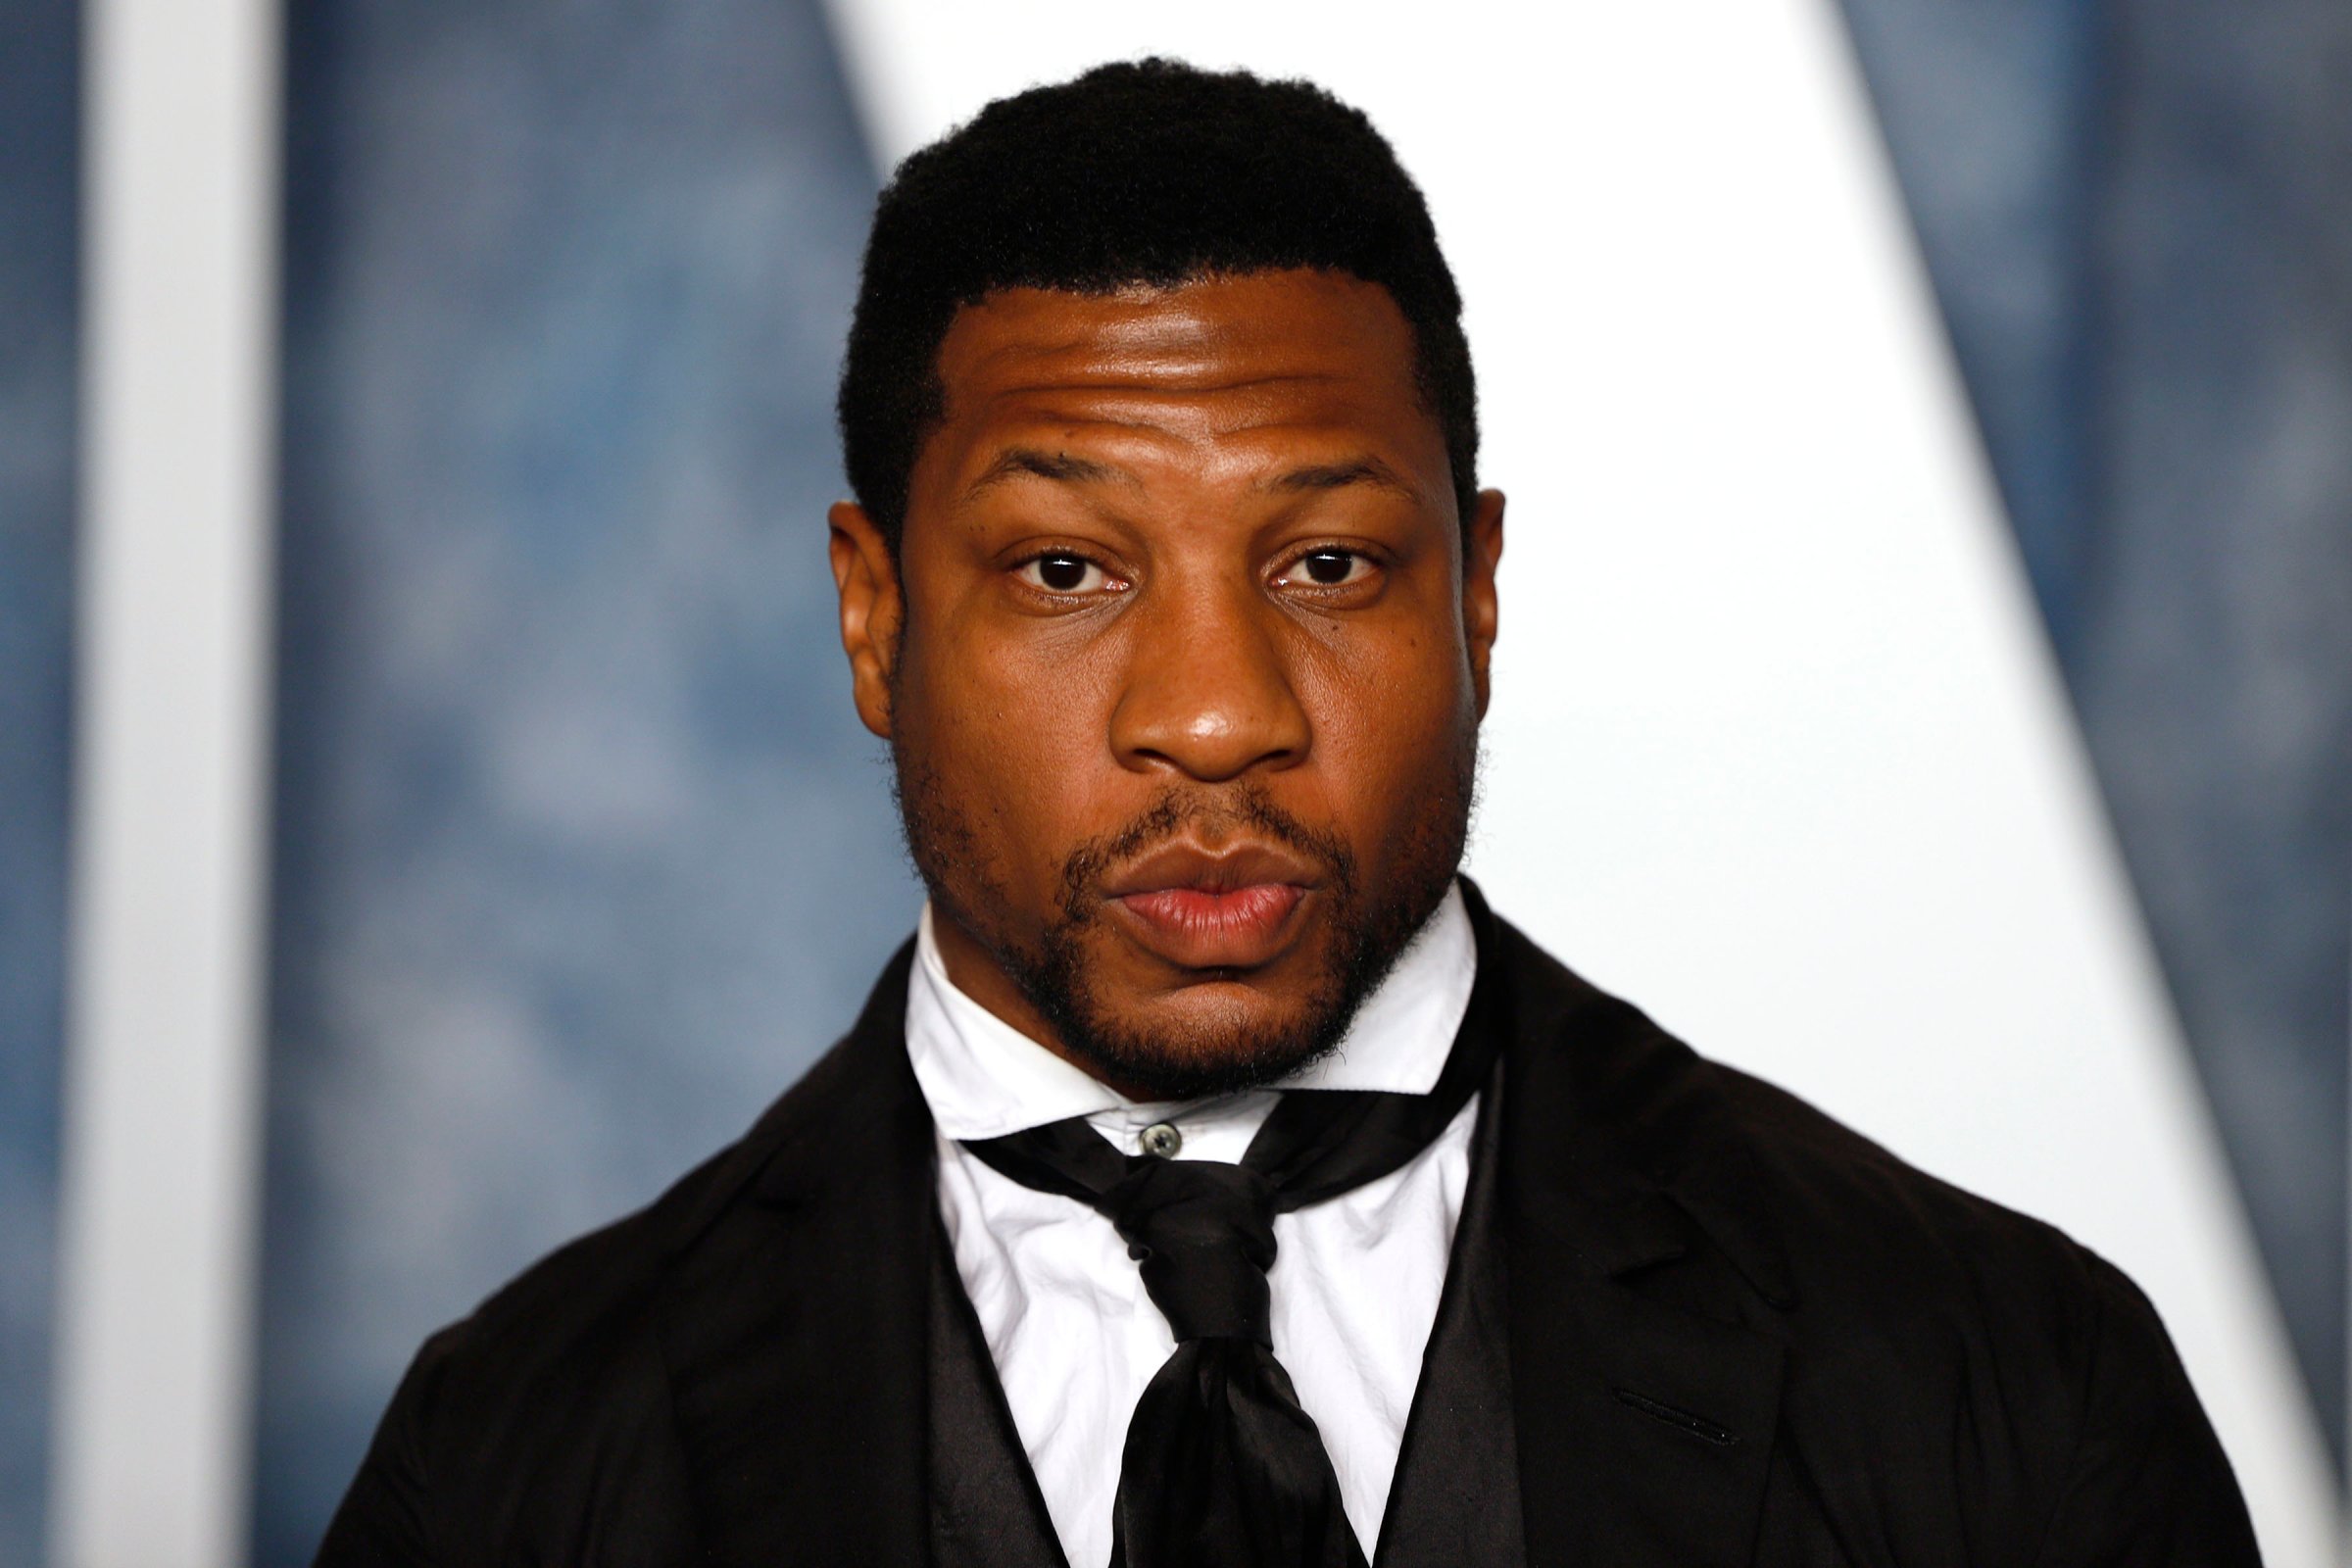 Jonathan Majors attends the 2023 Vanity Fair Oscar Party at the Wallis Annenberg Center for the Performing Arts in Beverly Hills, Calif., on March 12, 2023